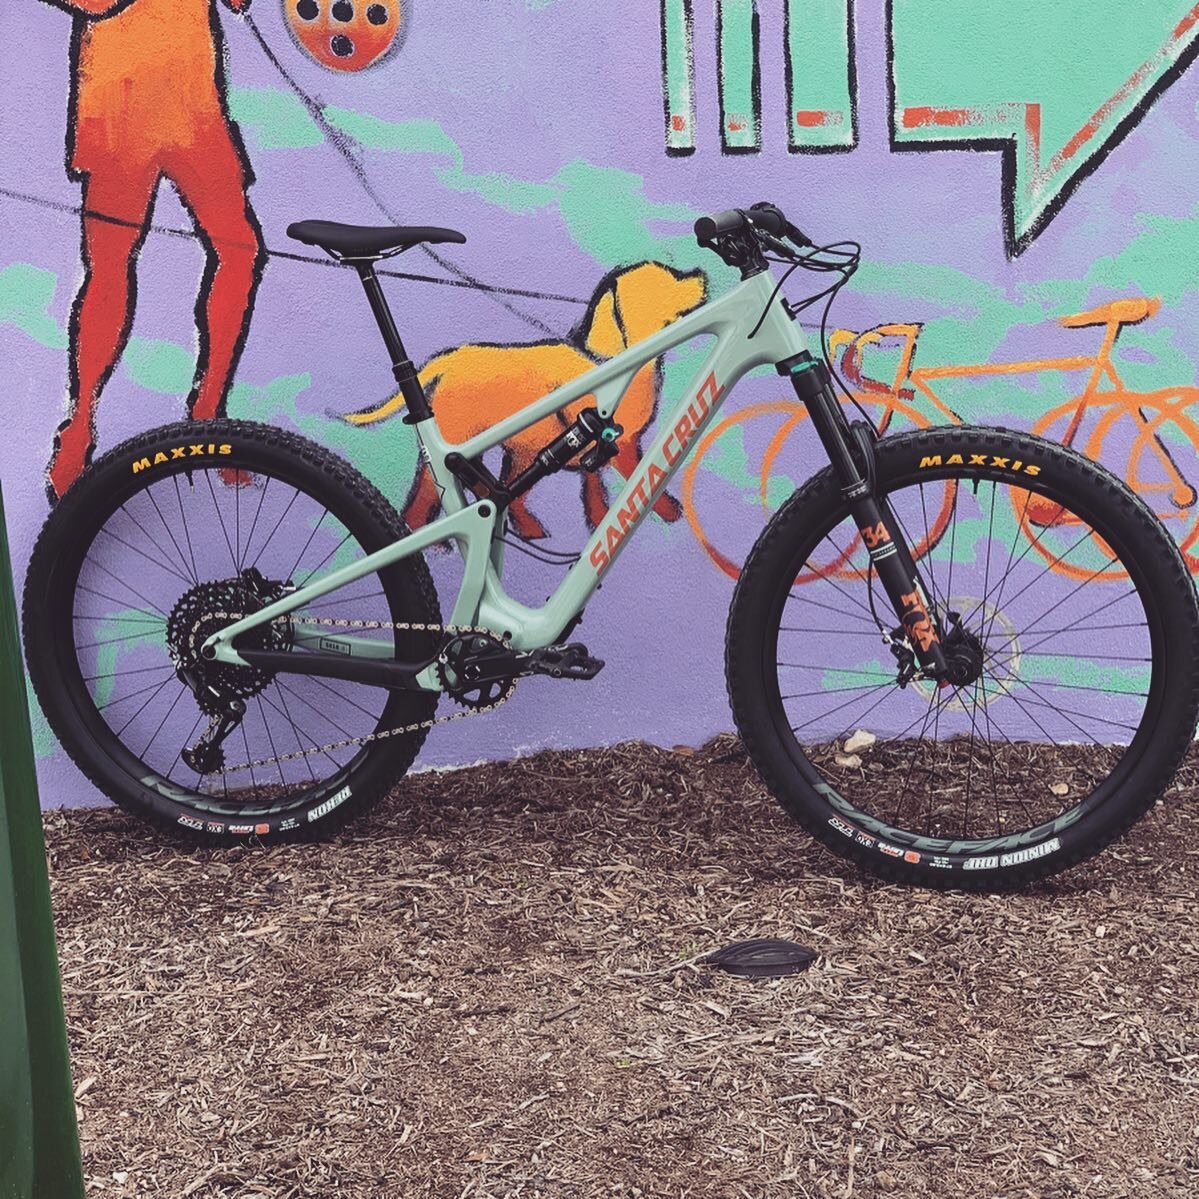 Just one of the many rad bikes that we built up for one of our customers before our move to our new location
.
#santacruzbikes #5010 #mtb #trailriding